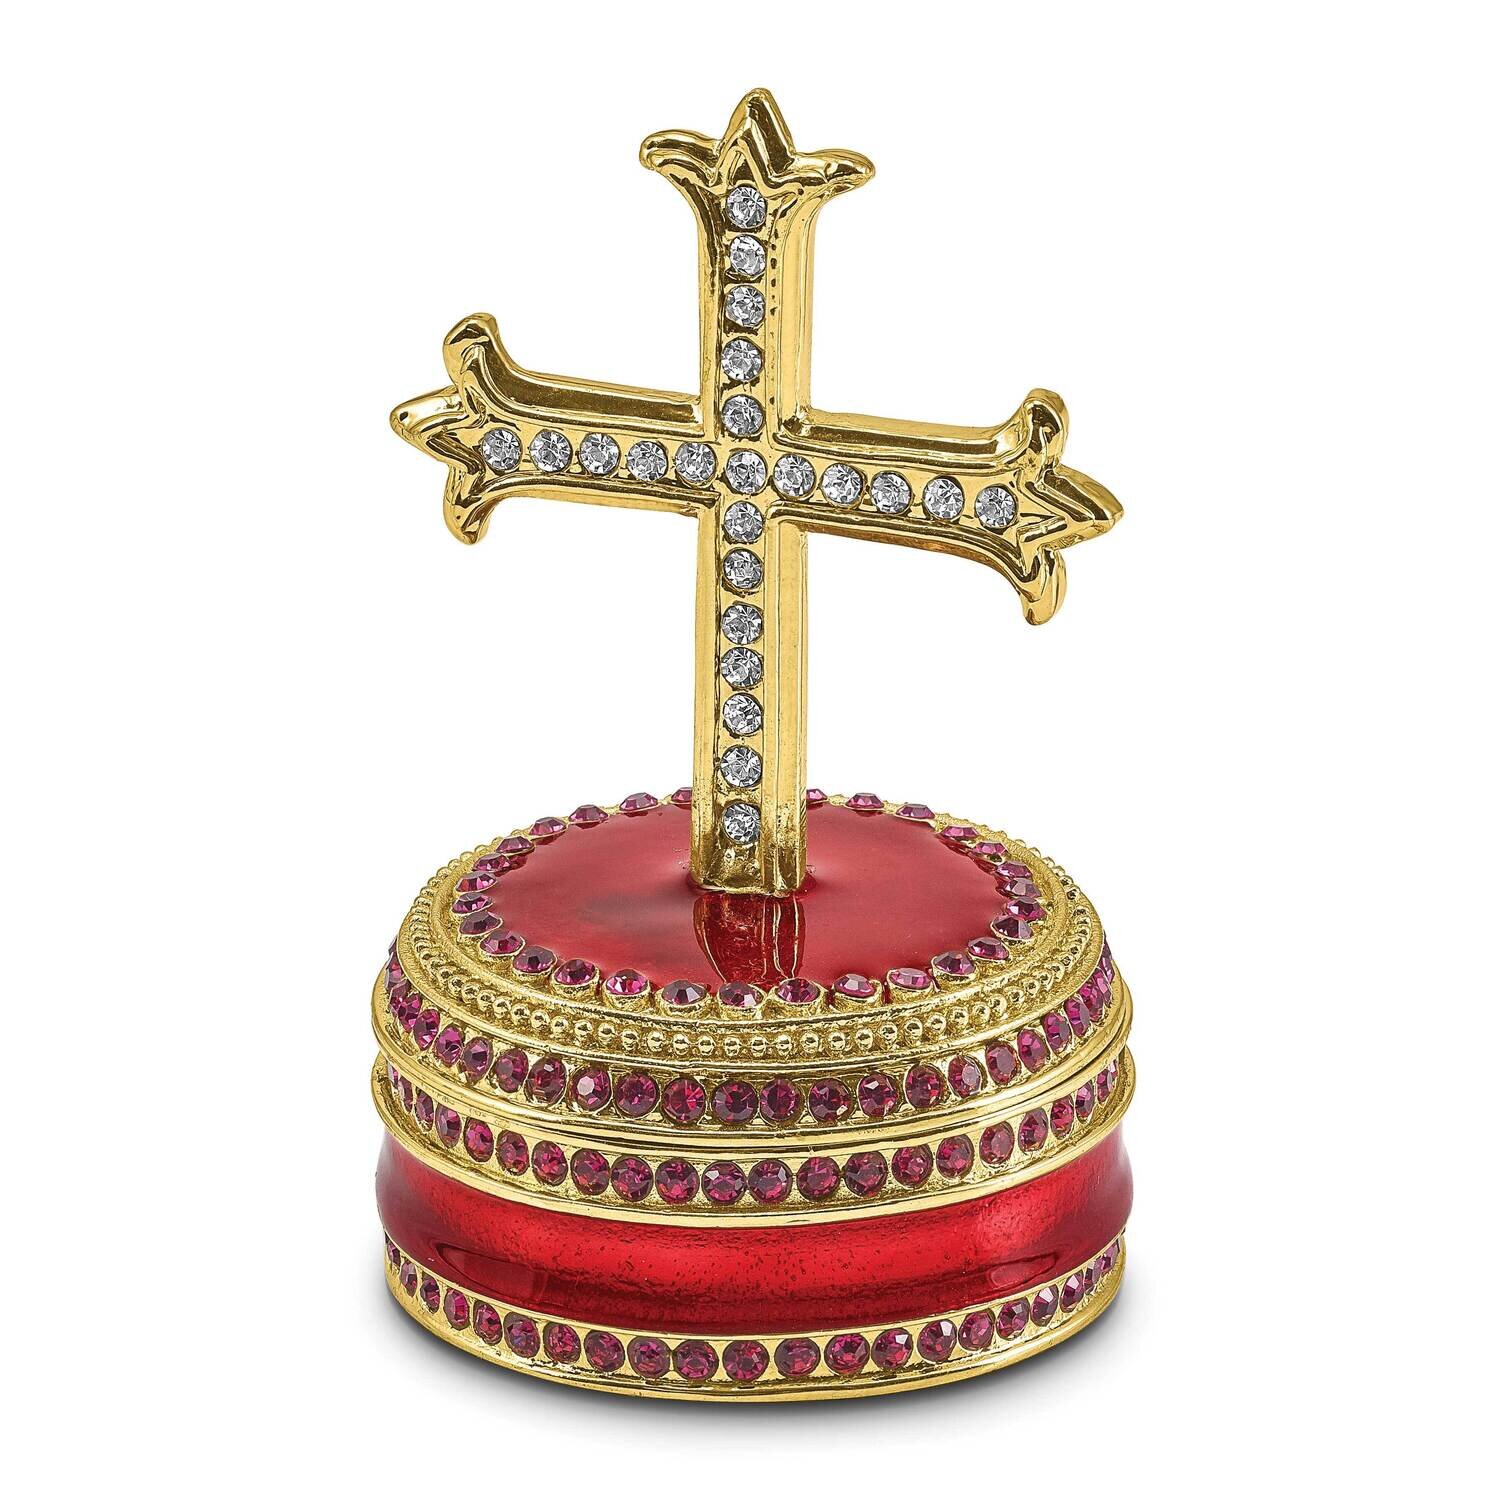 By Jere REVERENCE Cross on Round Trinket Box with Matching 18 Inch Necklace Pewter Bejeweled Crystals Gold-tone Enameled BJ4146